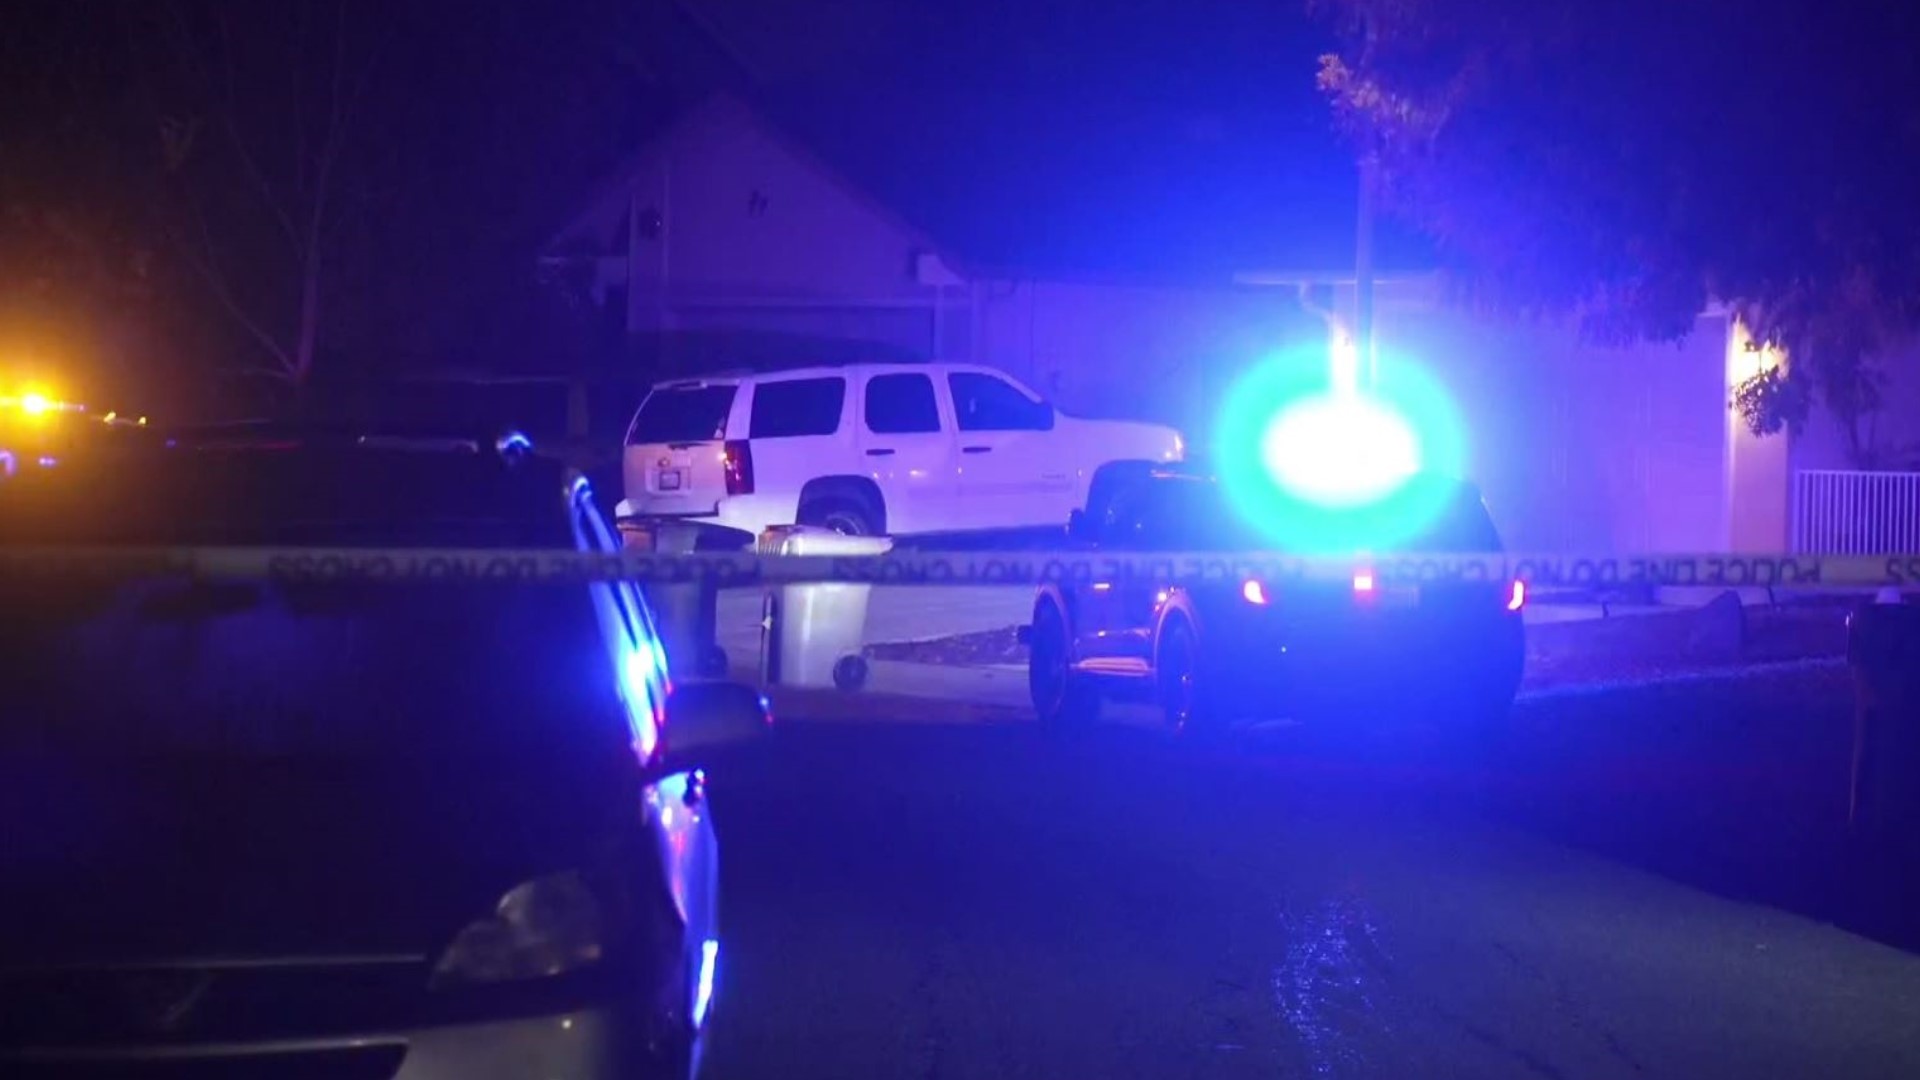 Three people are wounded, including a minor, after a fight led to a shooting in Sacramento Monday.